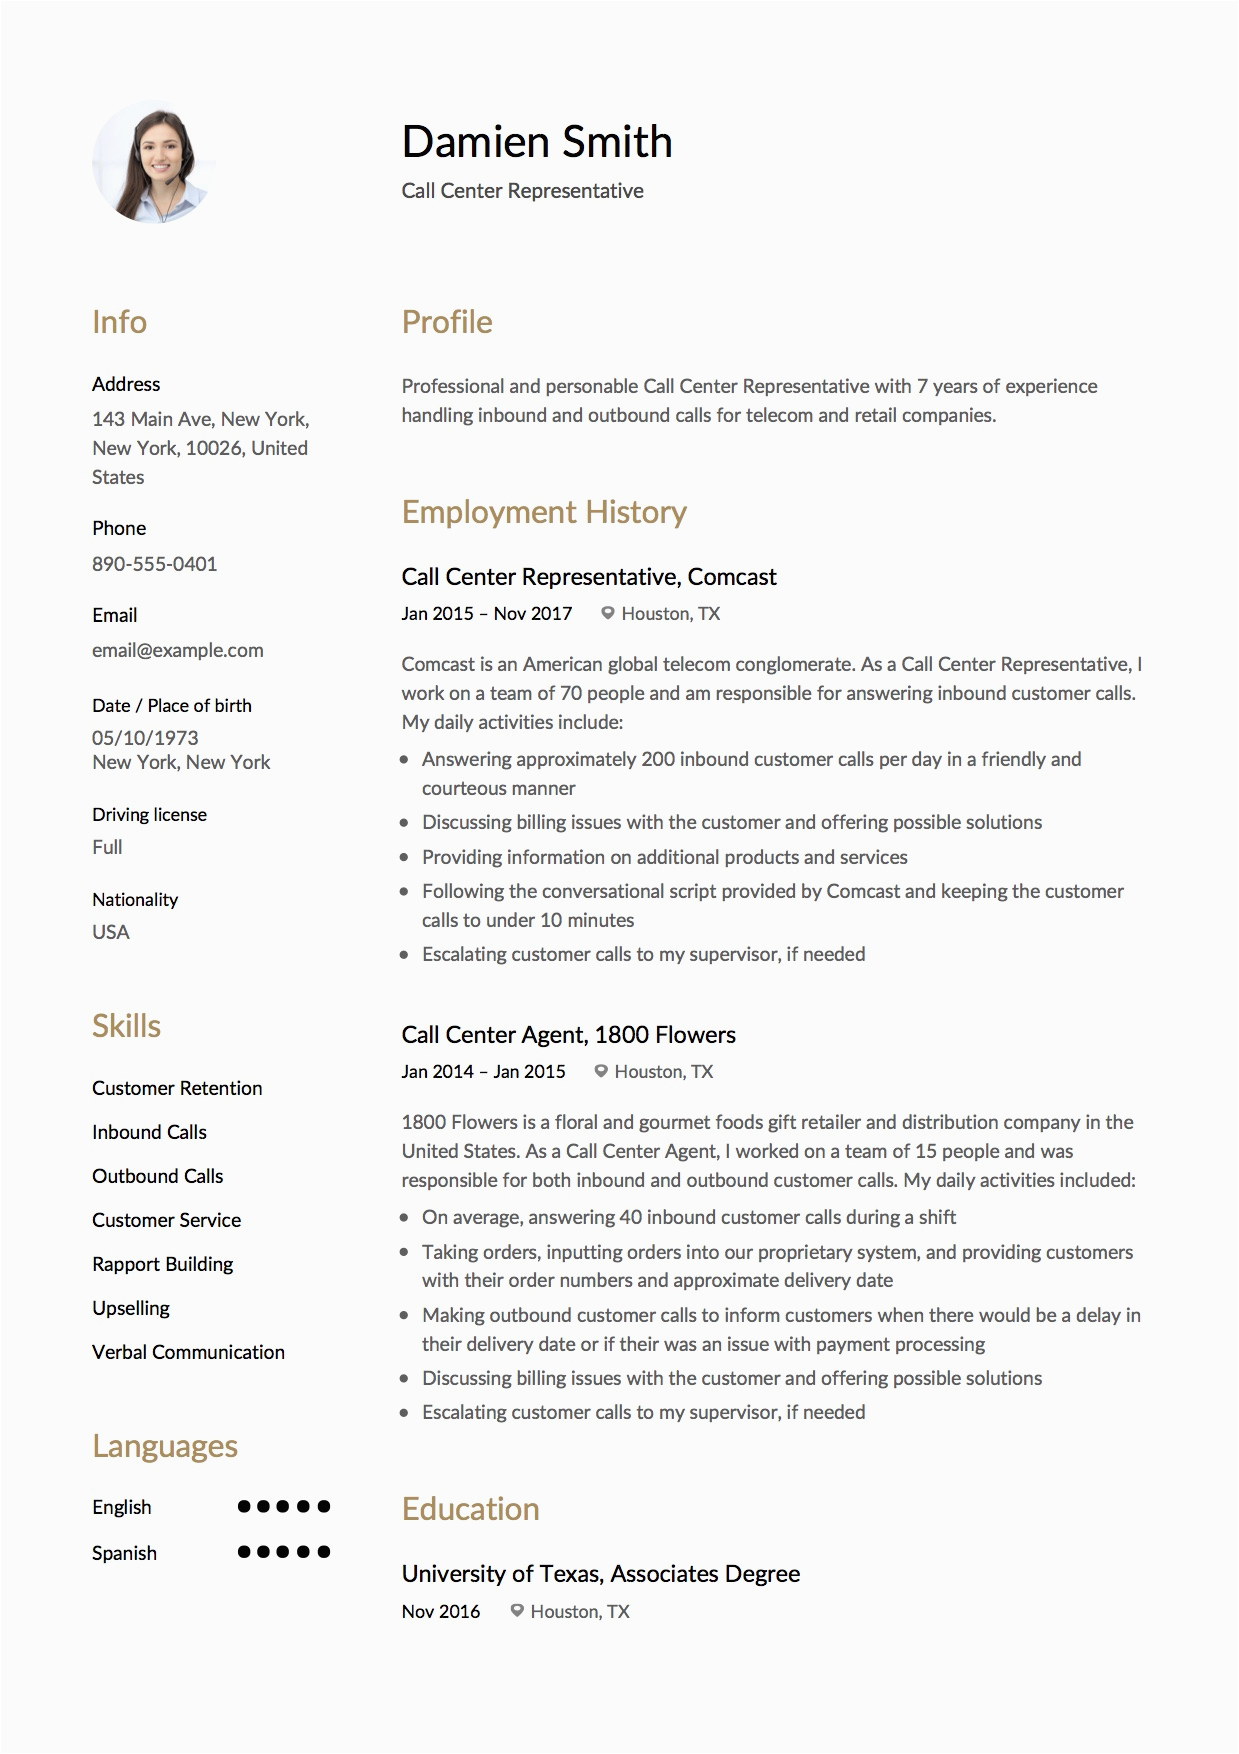 Sample Resume for Call Center Agent with Experience Resume Sample for Call Center Agent Philippines